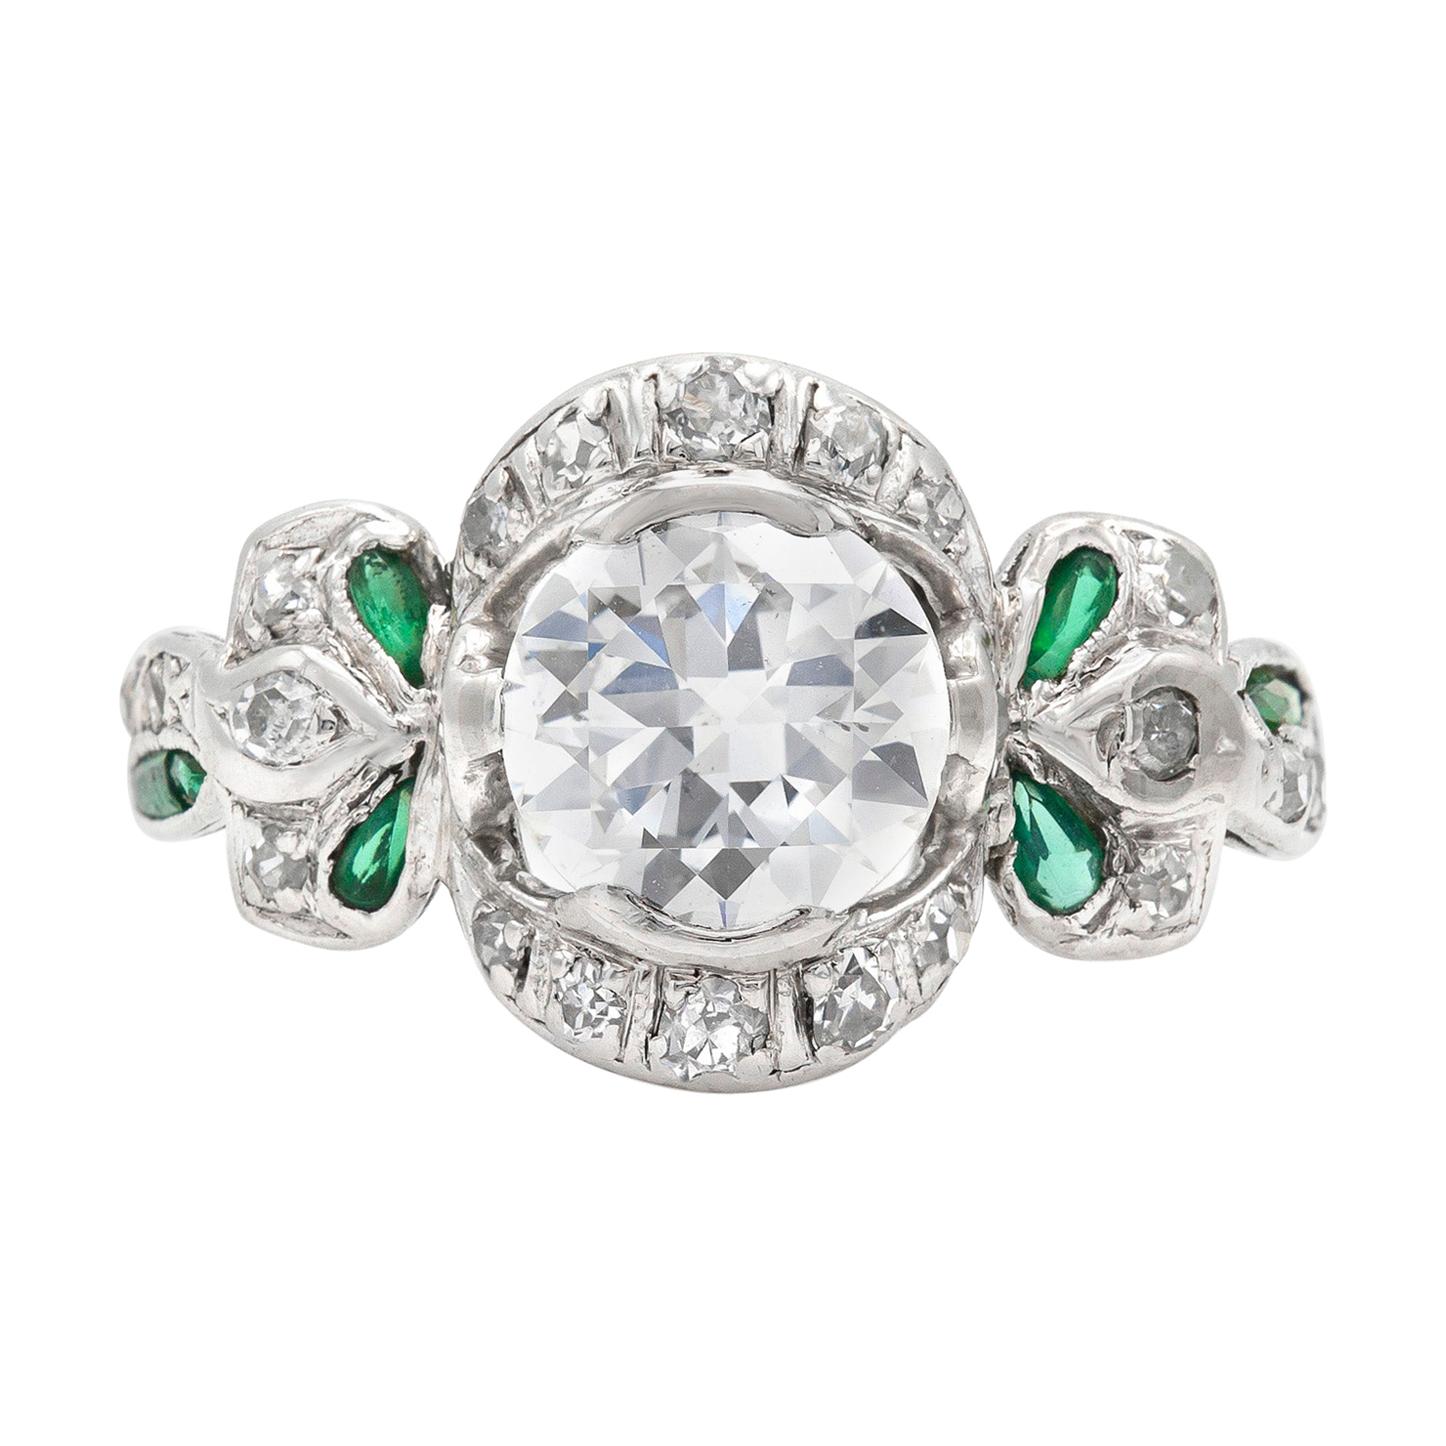 Edwardian 1.30 Carat Old European Cut Diamond Ring with Emeralds For Sale